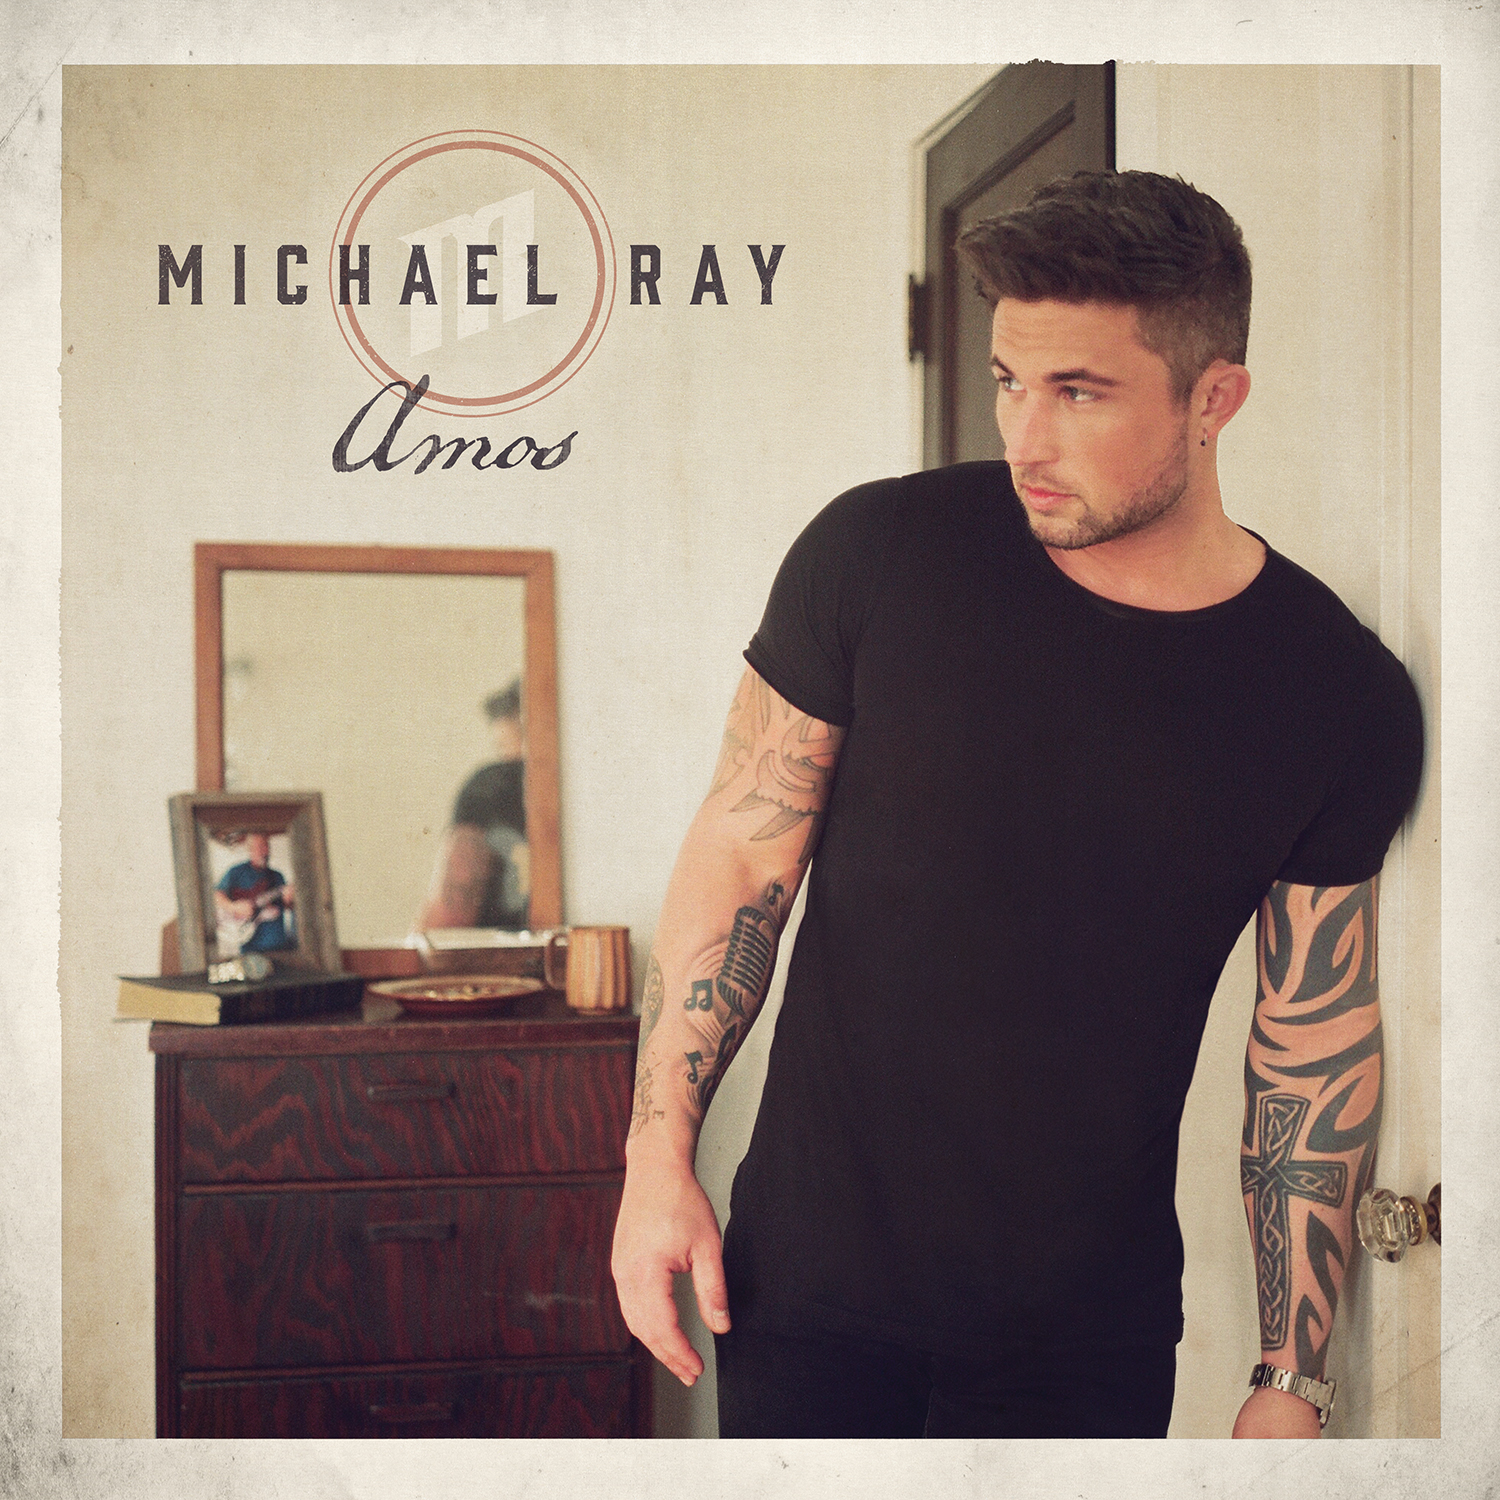 We Finally Have a Release Date for Michael Ray’s Sophomore Album